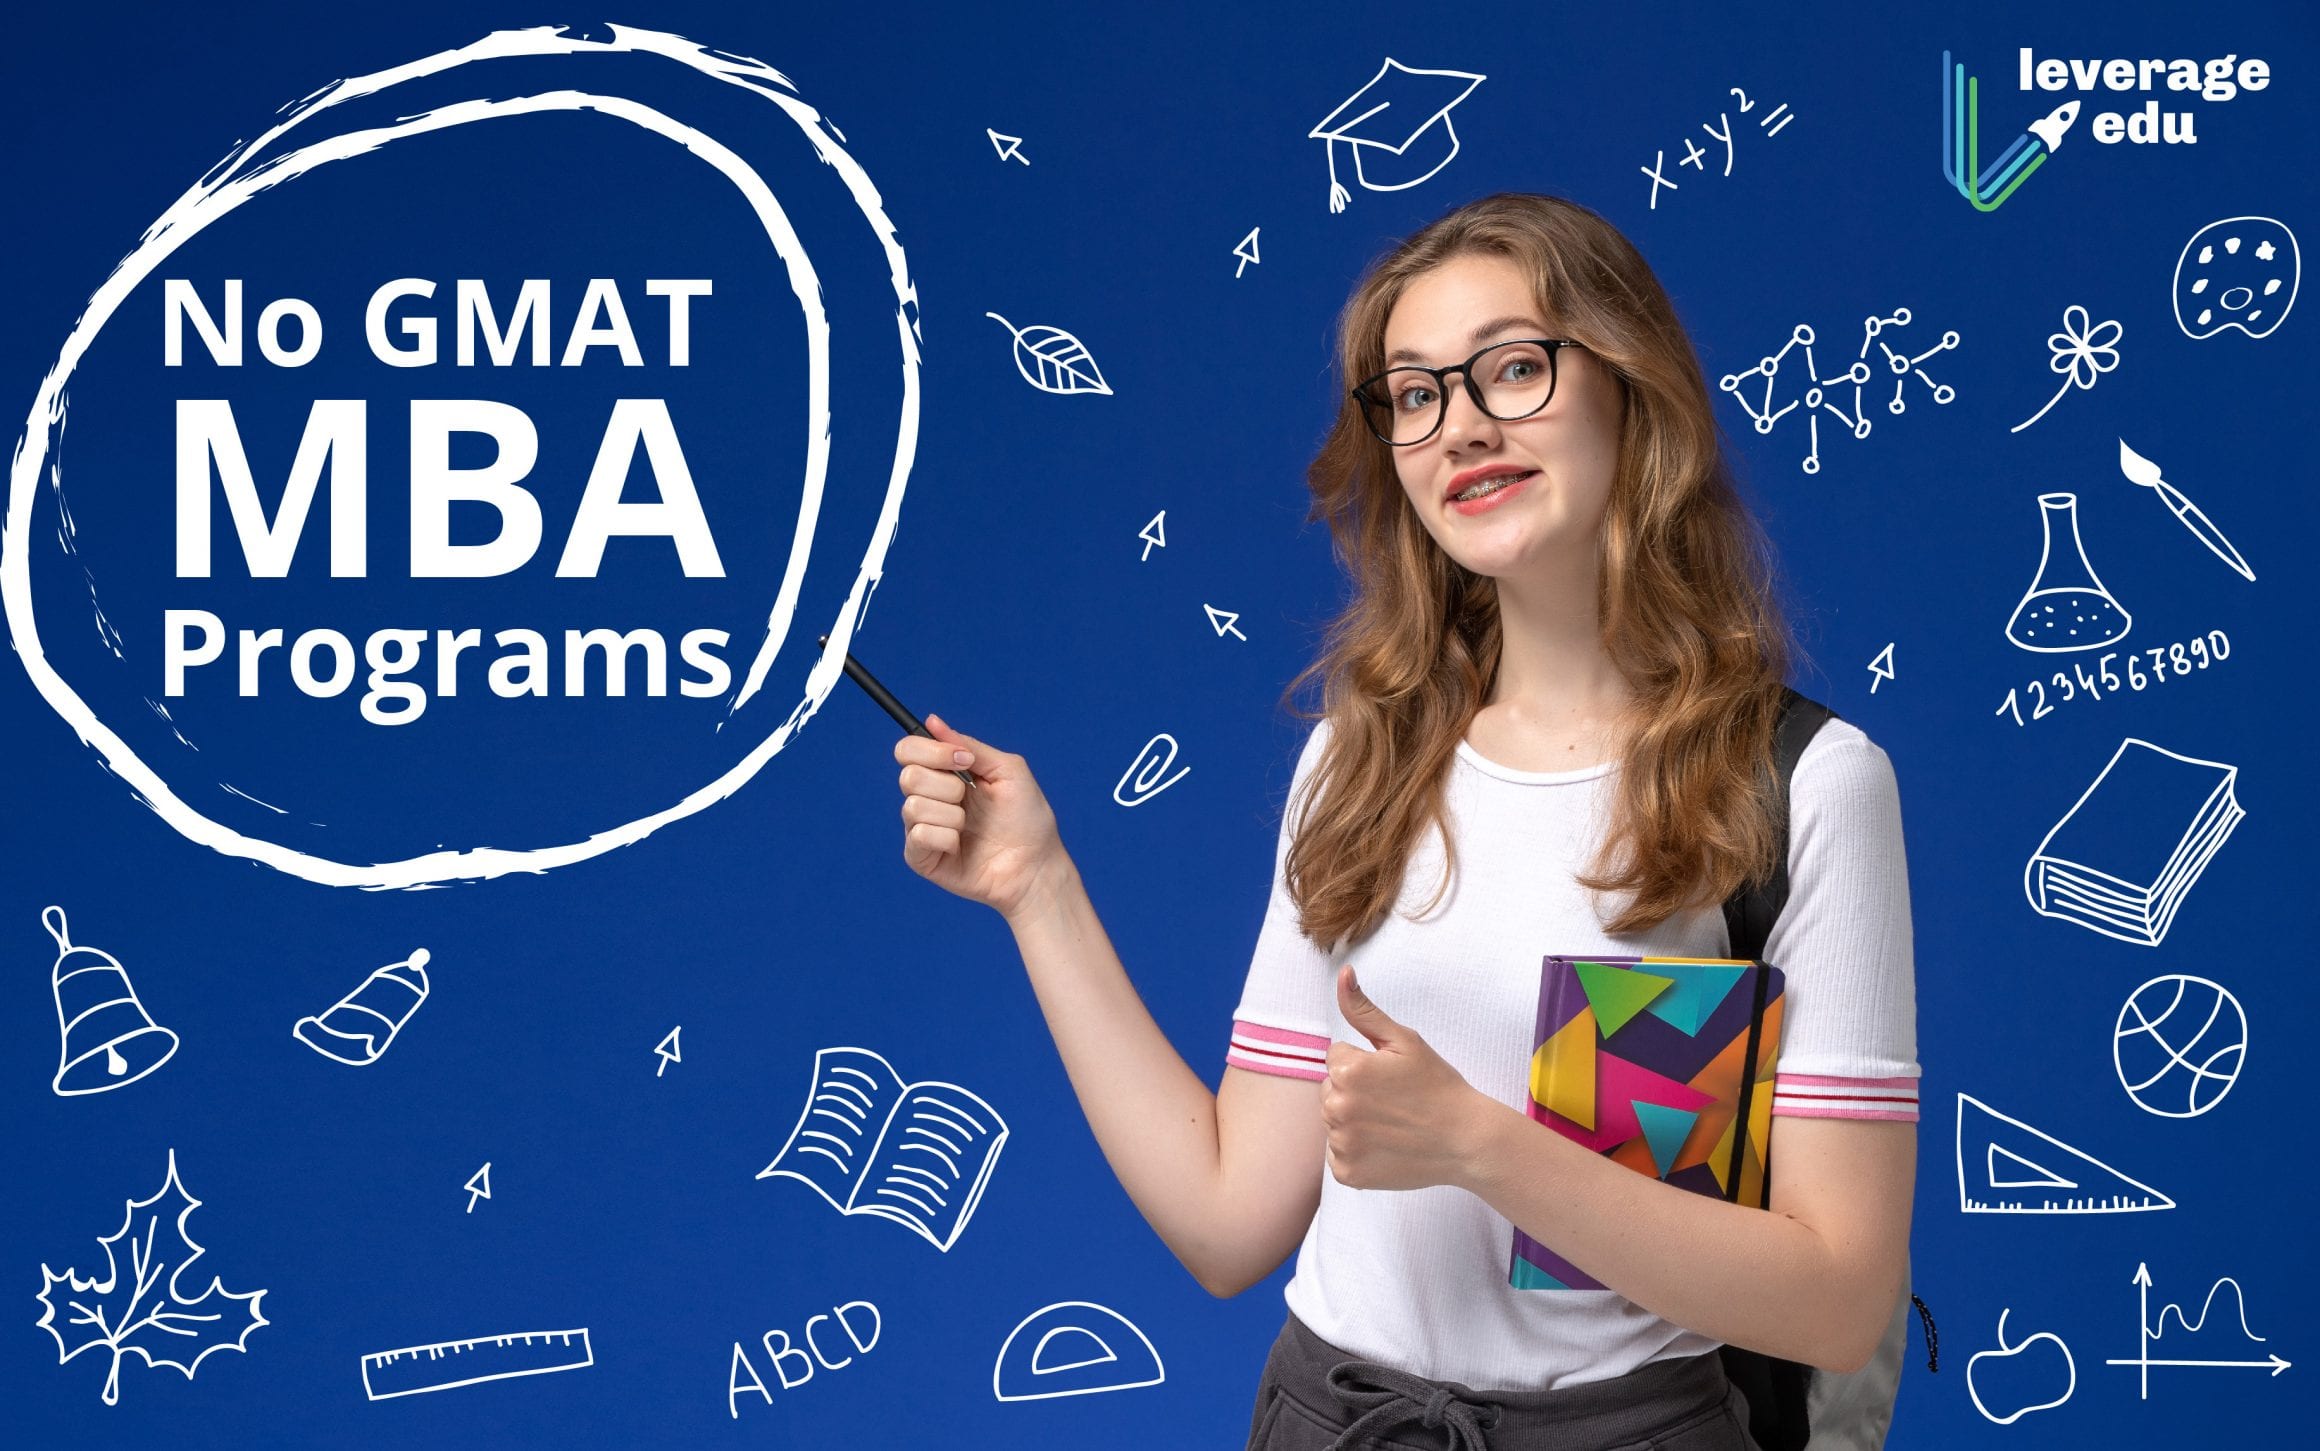 The Best No GMAT MBA Programs in 2021! Leverage Edu